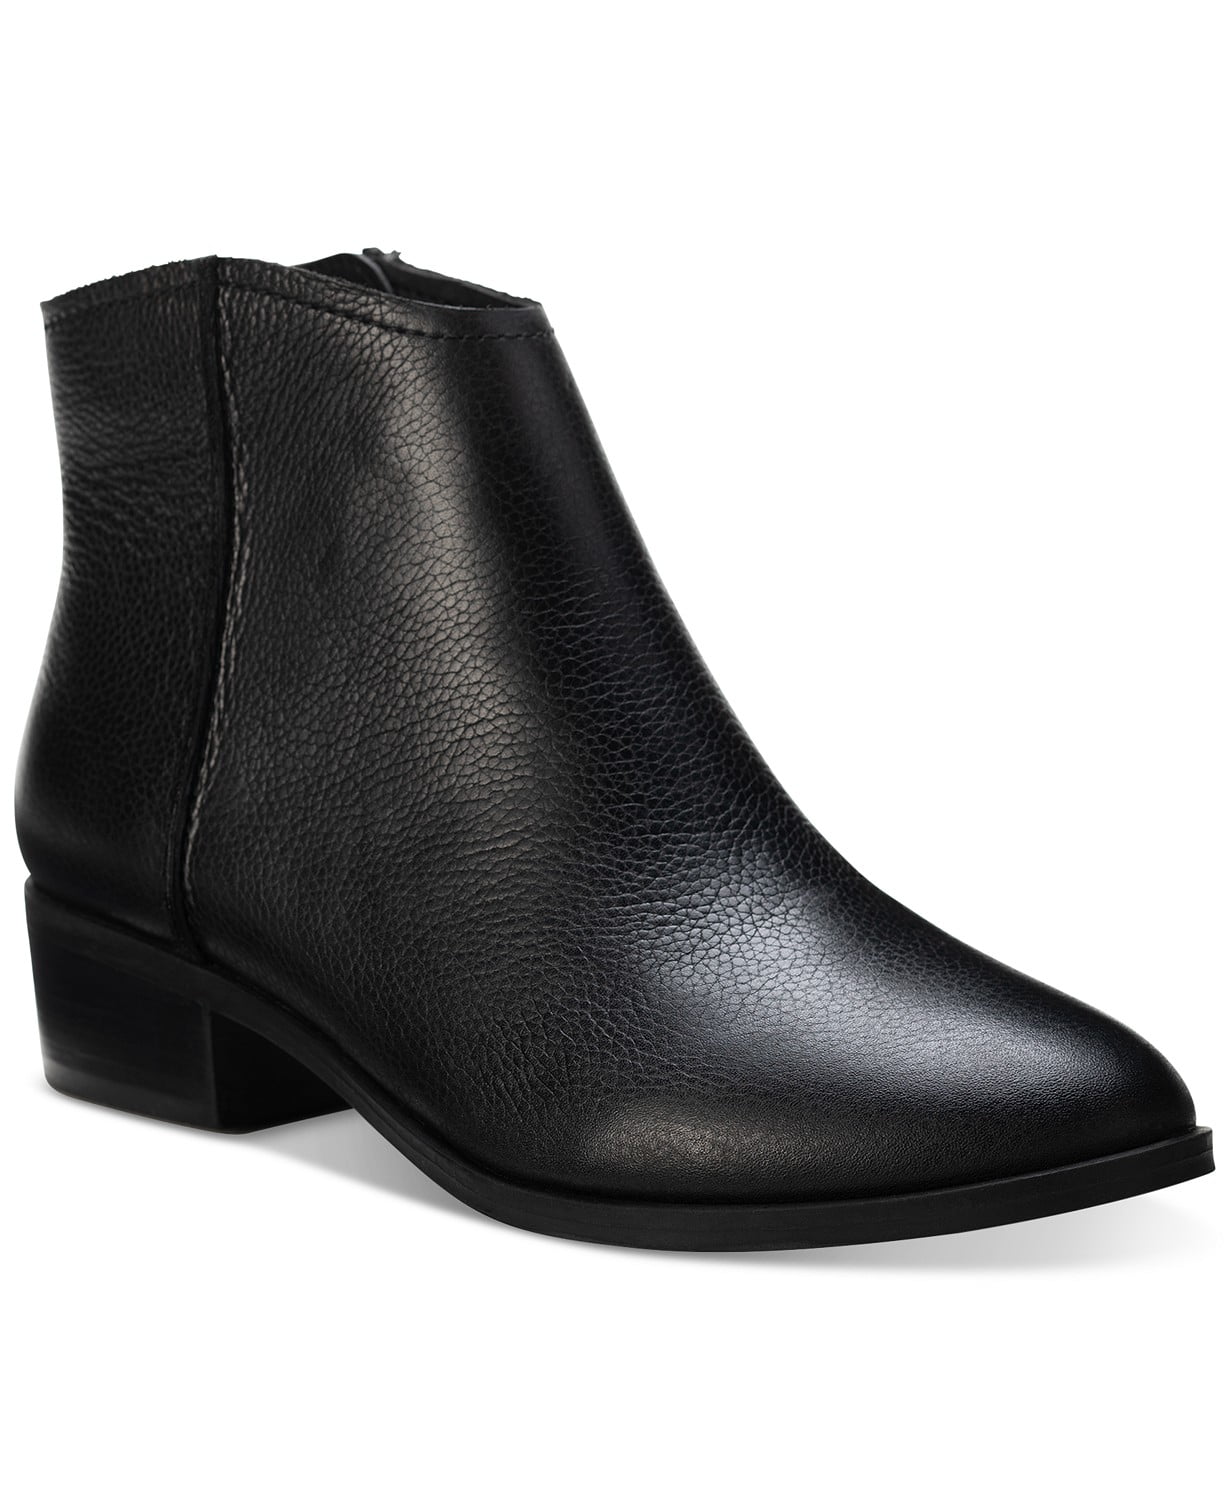 www.couturepoint.com-sun-stone-womens-black-leather-jolene-ankle-booties